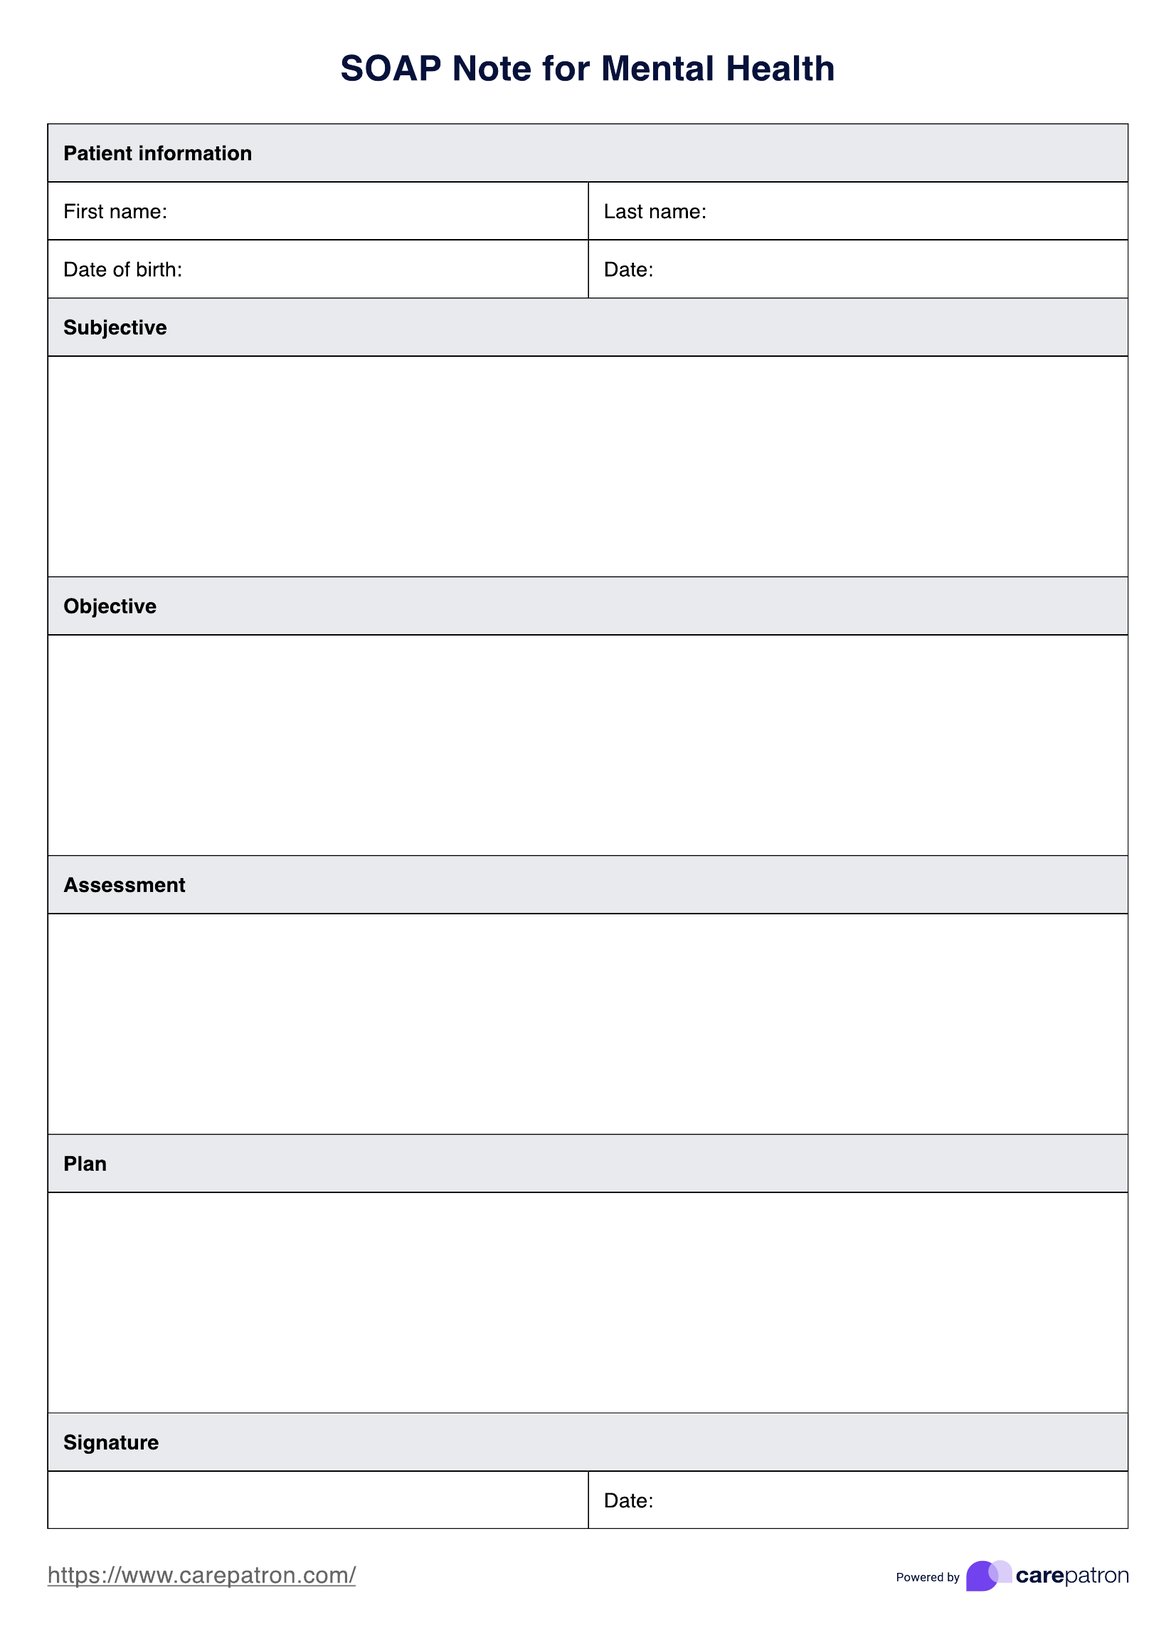 SOAP Notes for Mental Health Template PDF Example